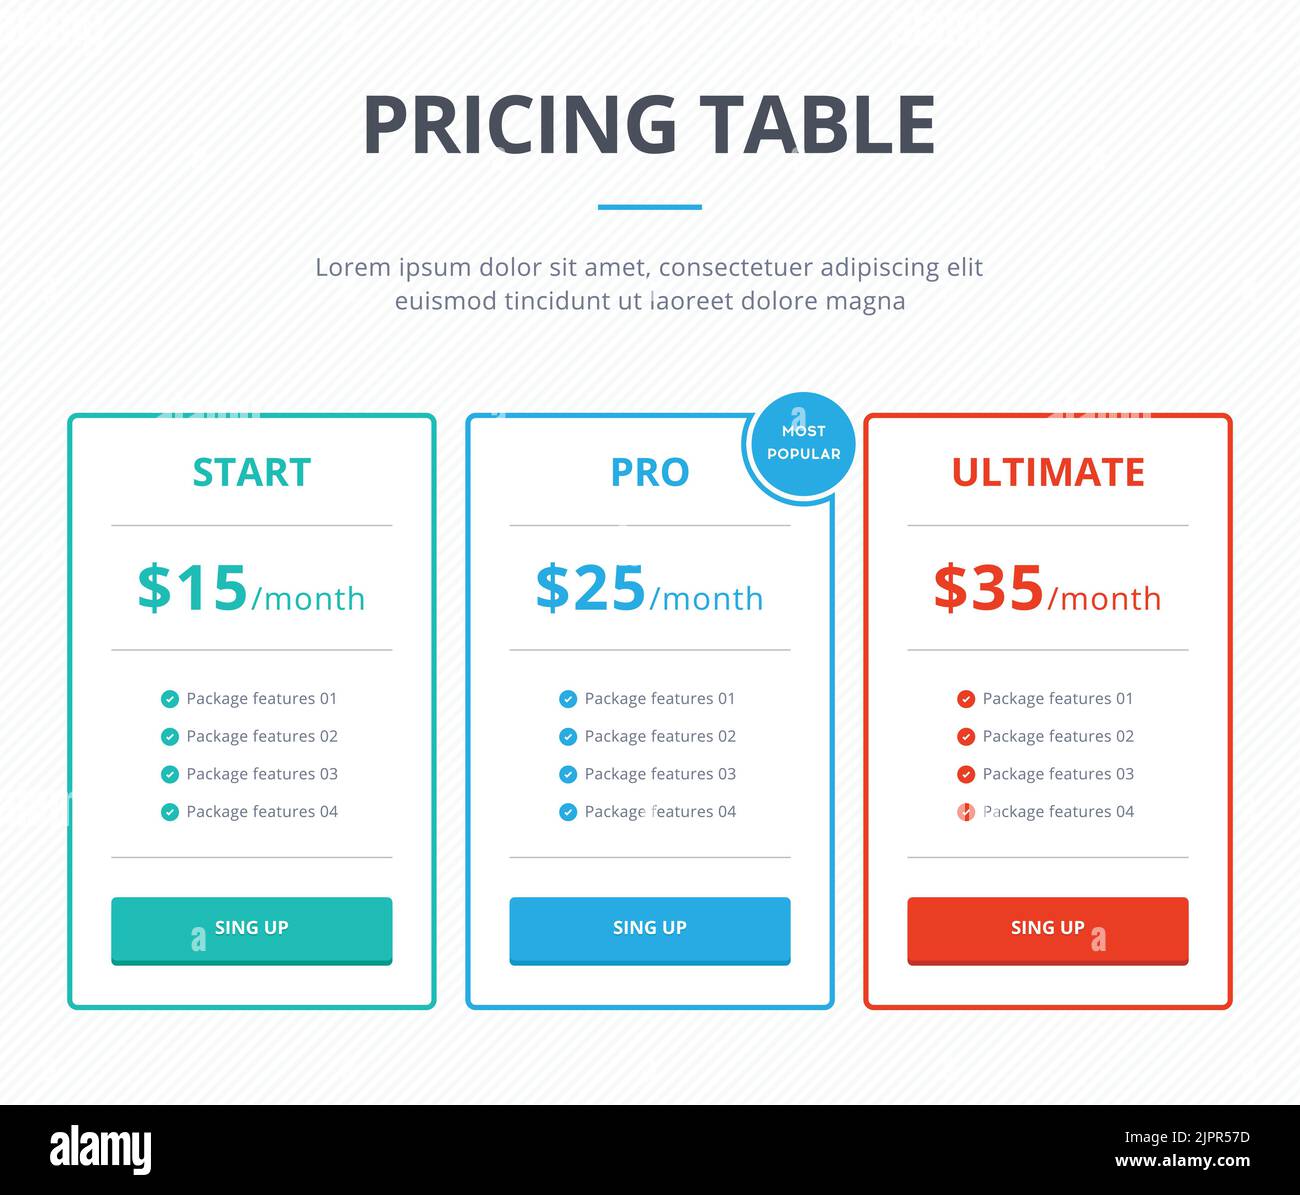 Pricing table template with three plans Start Pro and Ultimate with